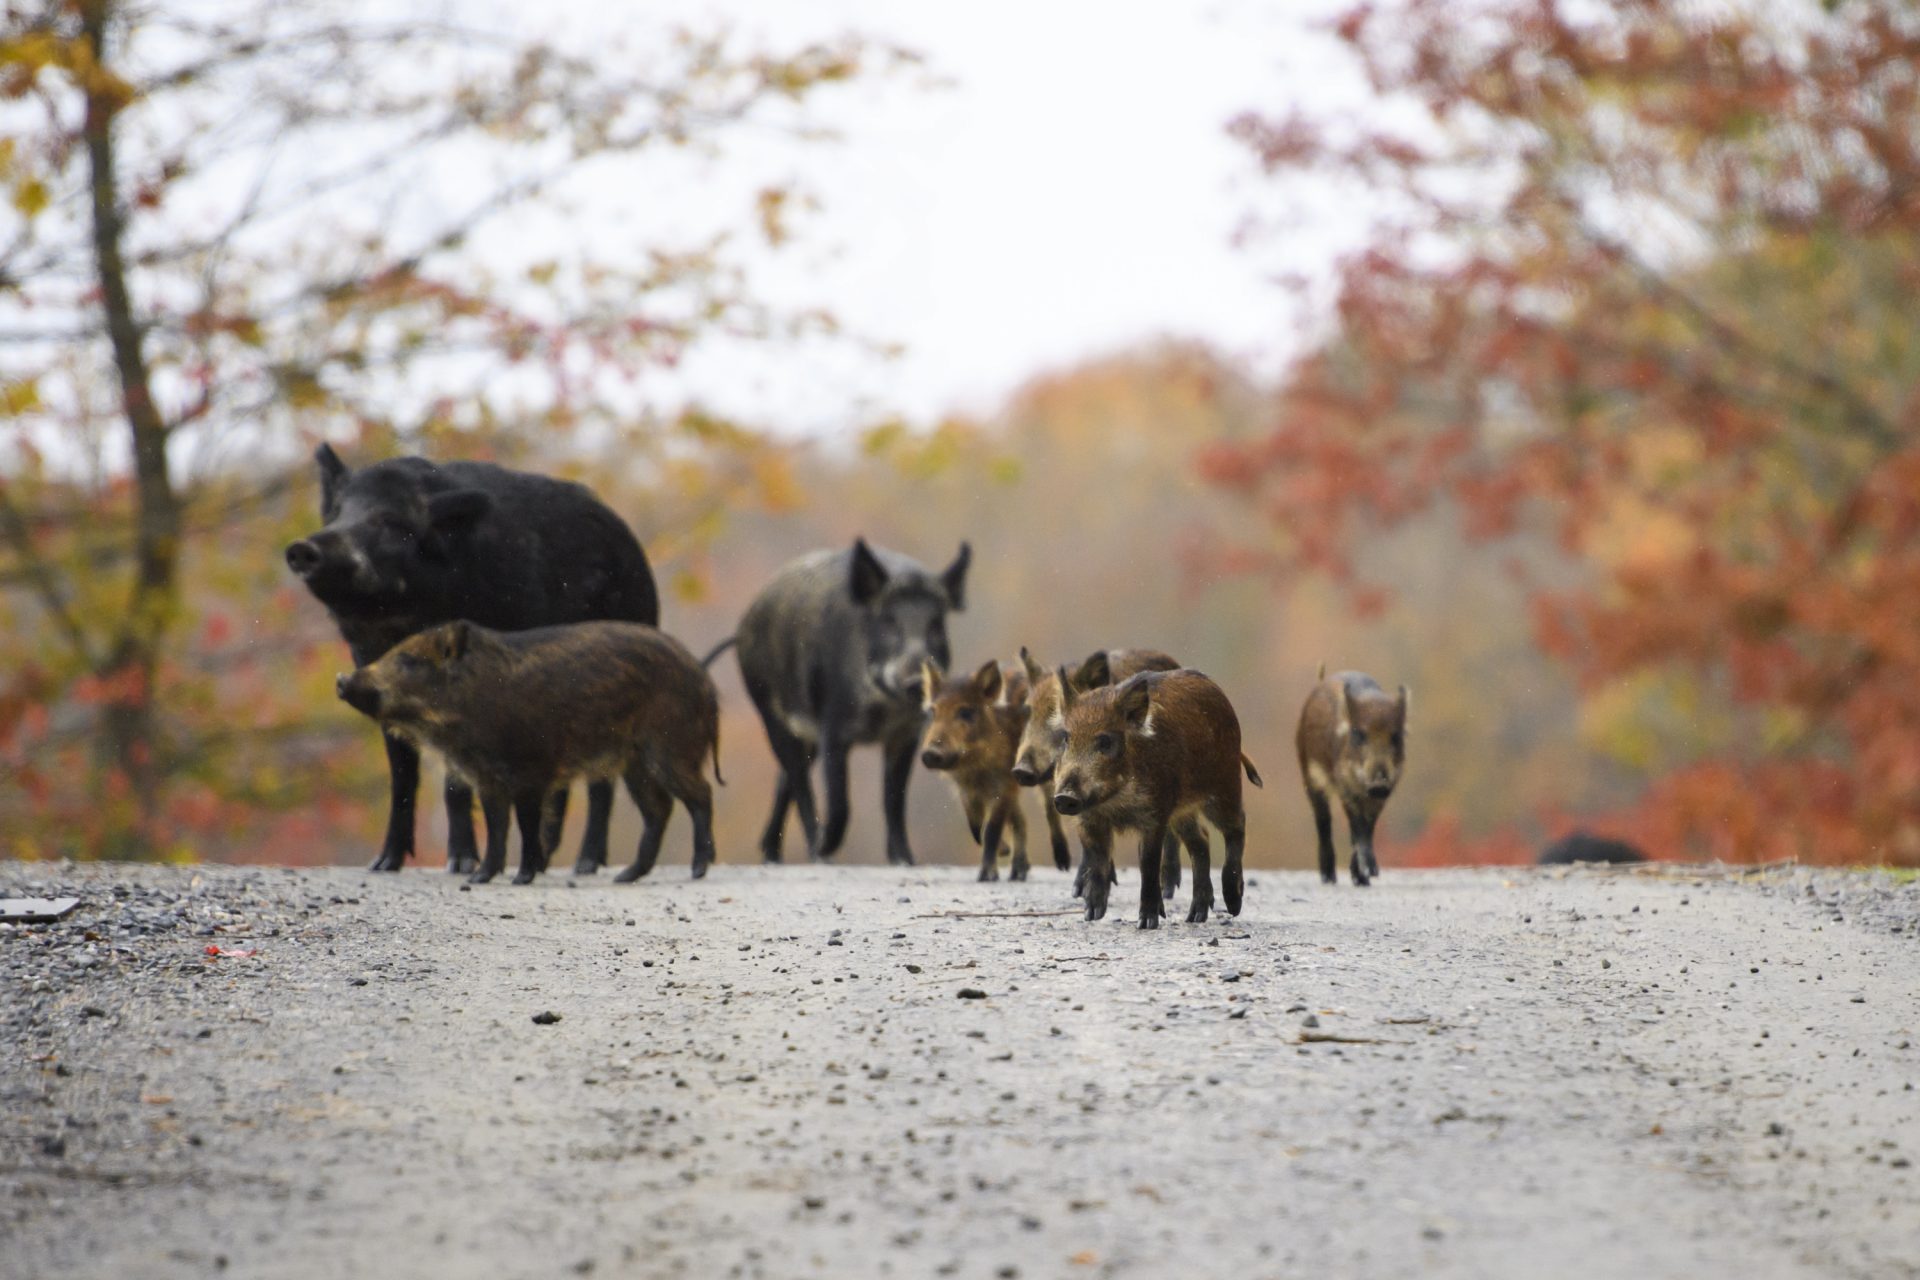 A Canadian plague of invasive wild pigs is threatening to infest the US